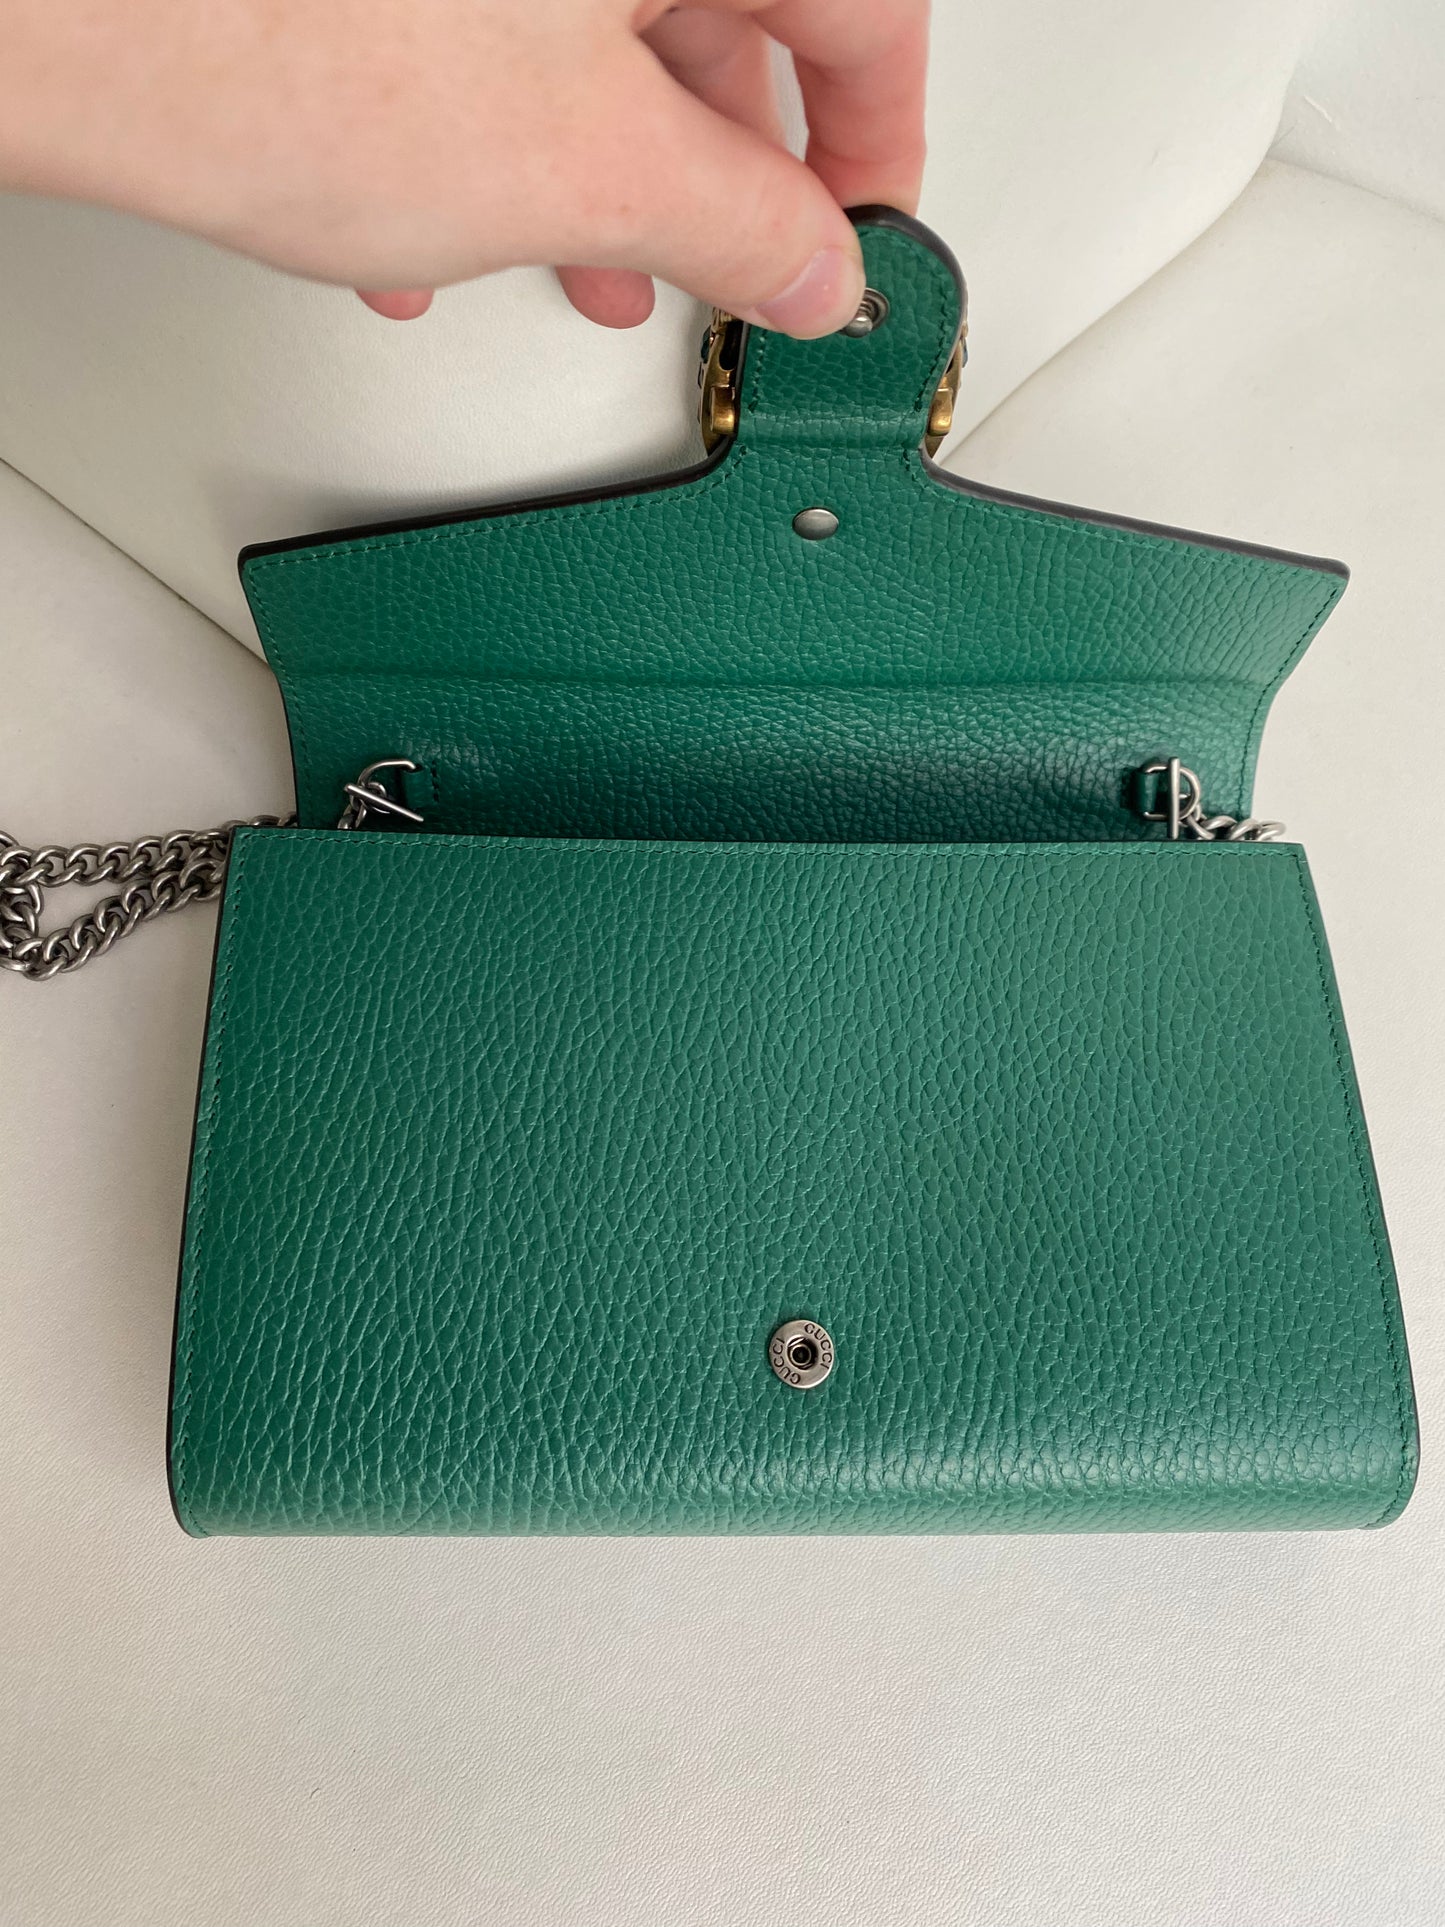 Gucci Dionysus Green Wallet on Chain